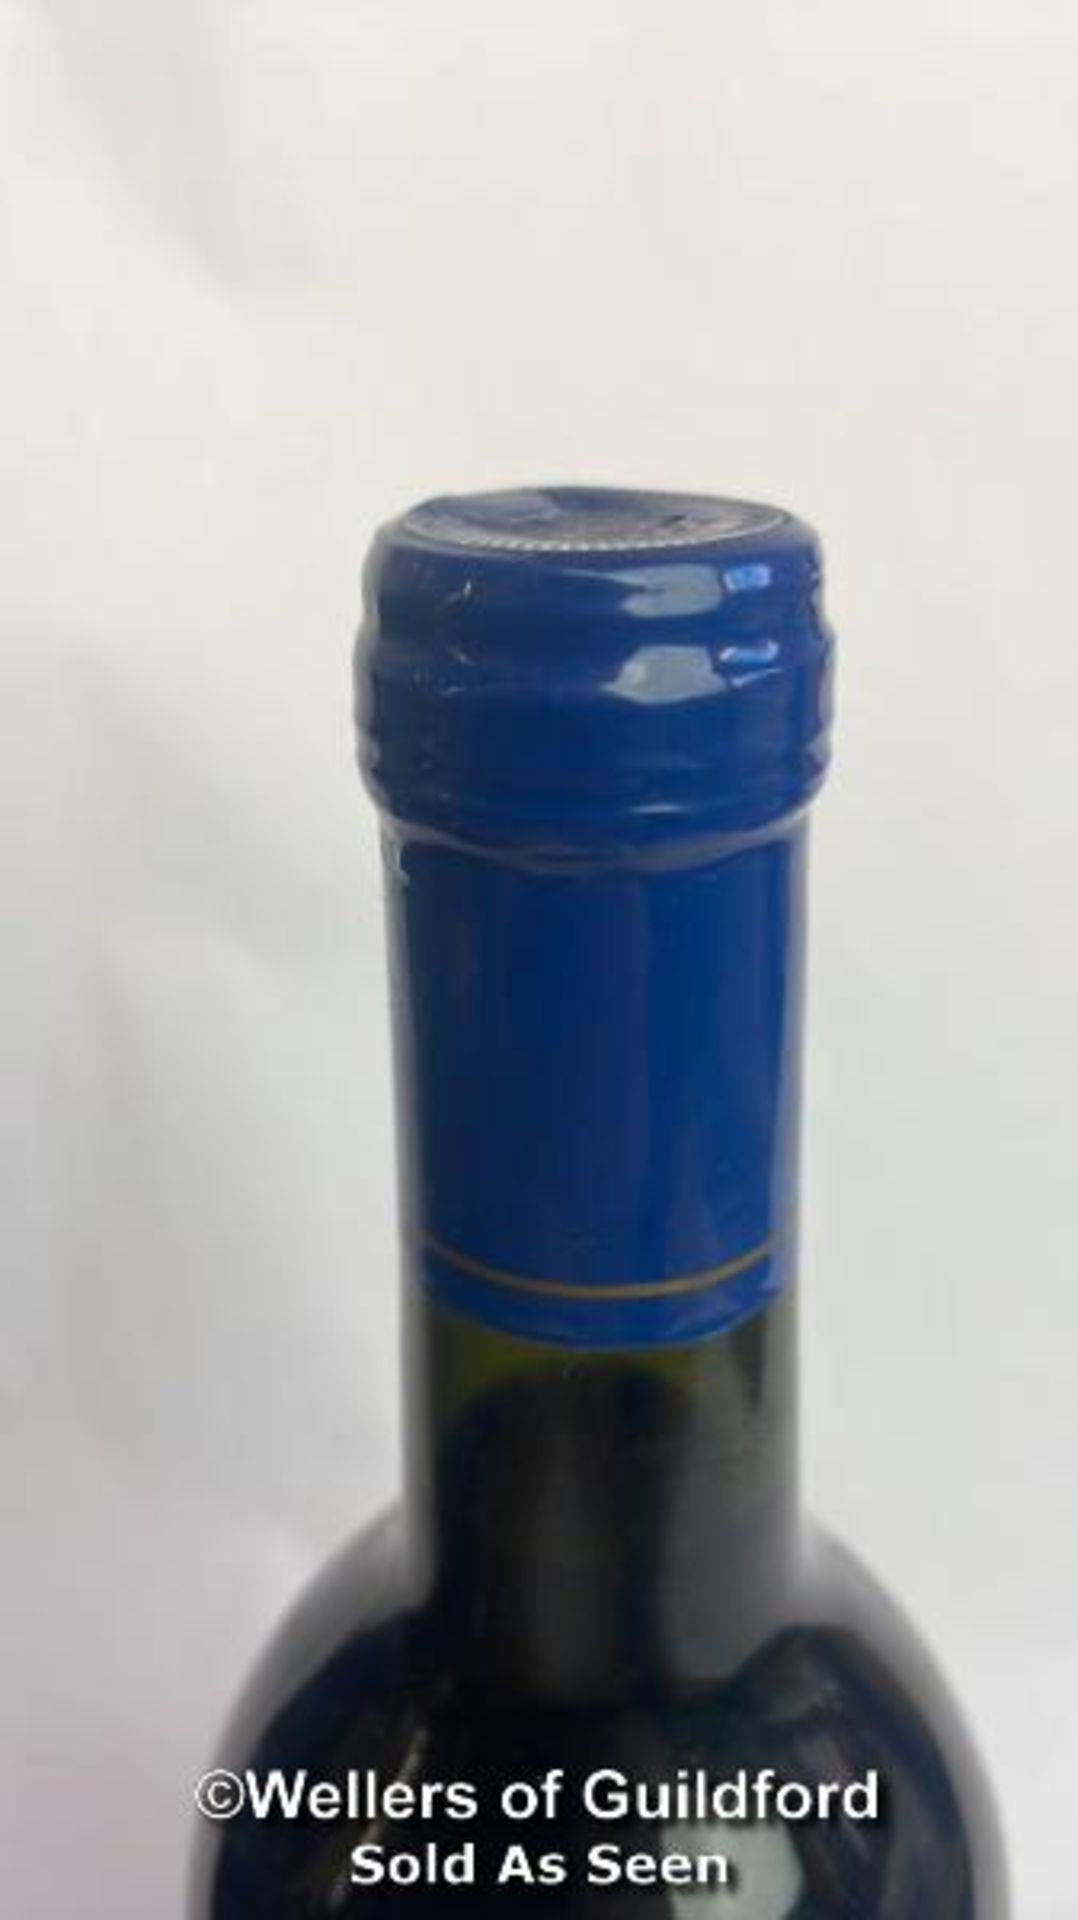 23 Special Air Service Regiment, Tanners Wine, 75cl, 11.5% / Please see images for fill level and - Bild 5 aus 5